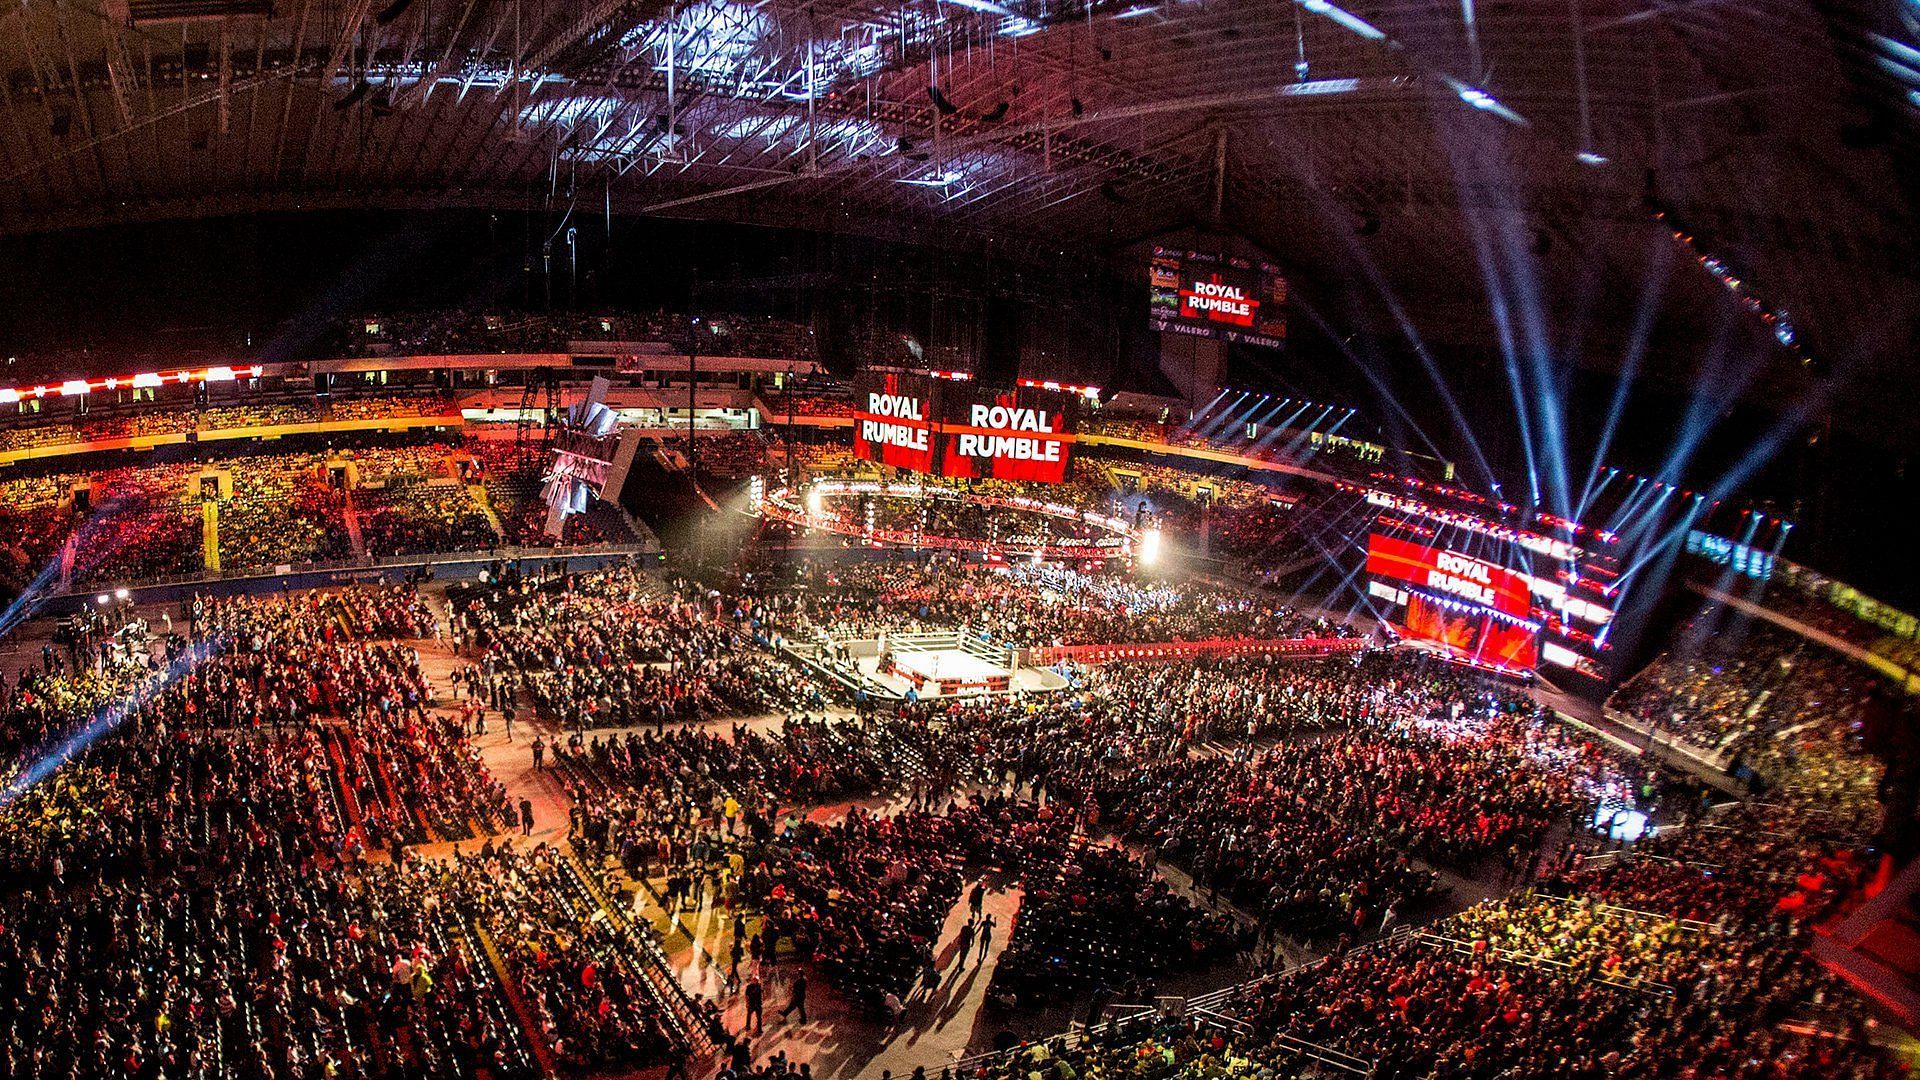 The WWE Royal Rumble ring and stage/set with a packed arena